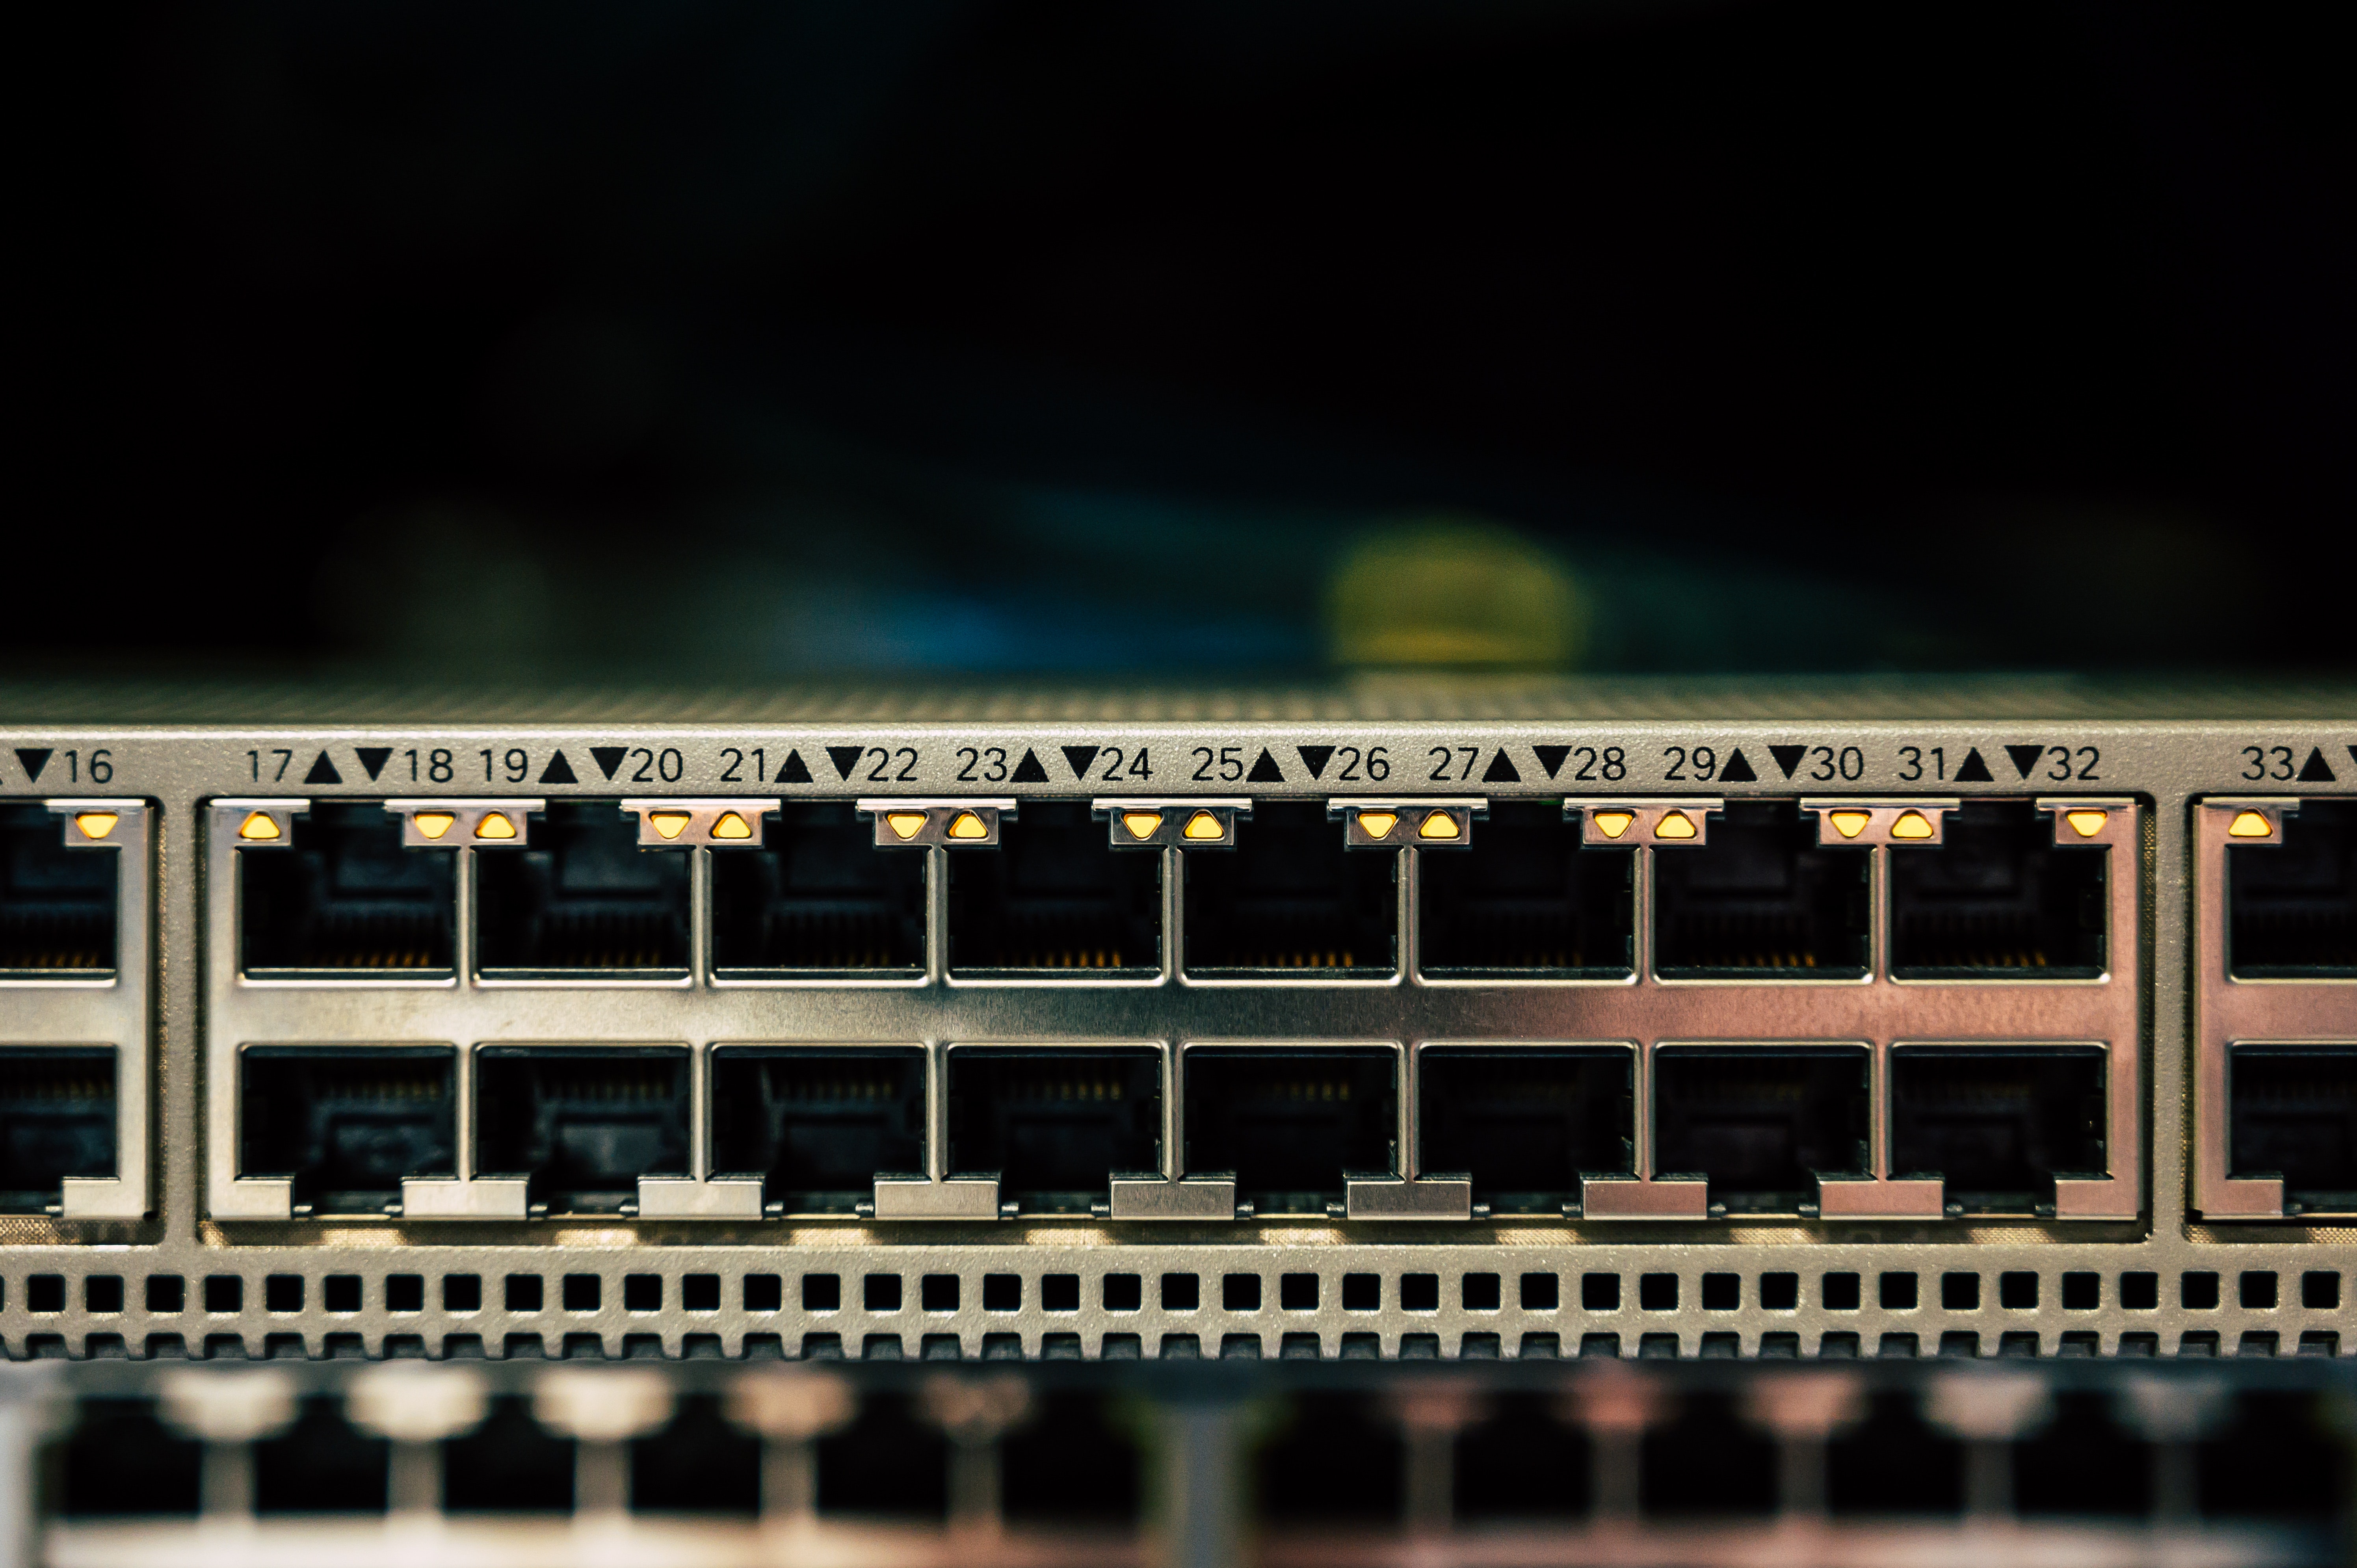 Network Ethernet Switch Switches Closeup 5982x3980